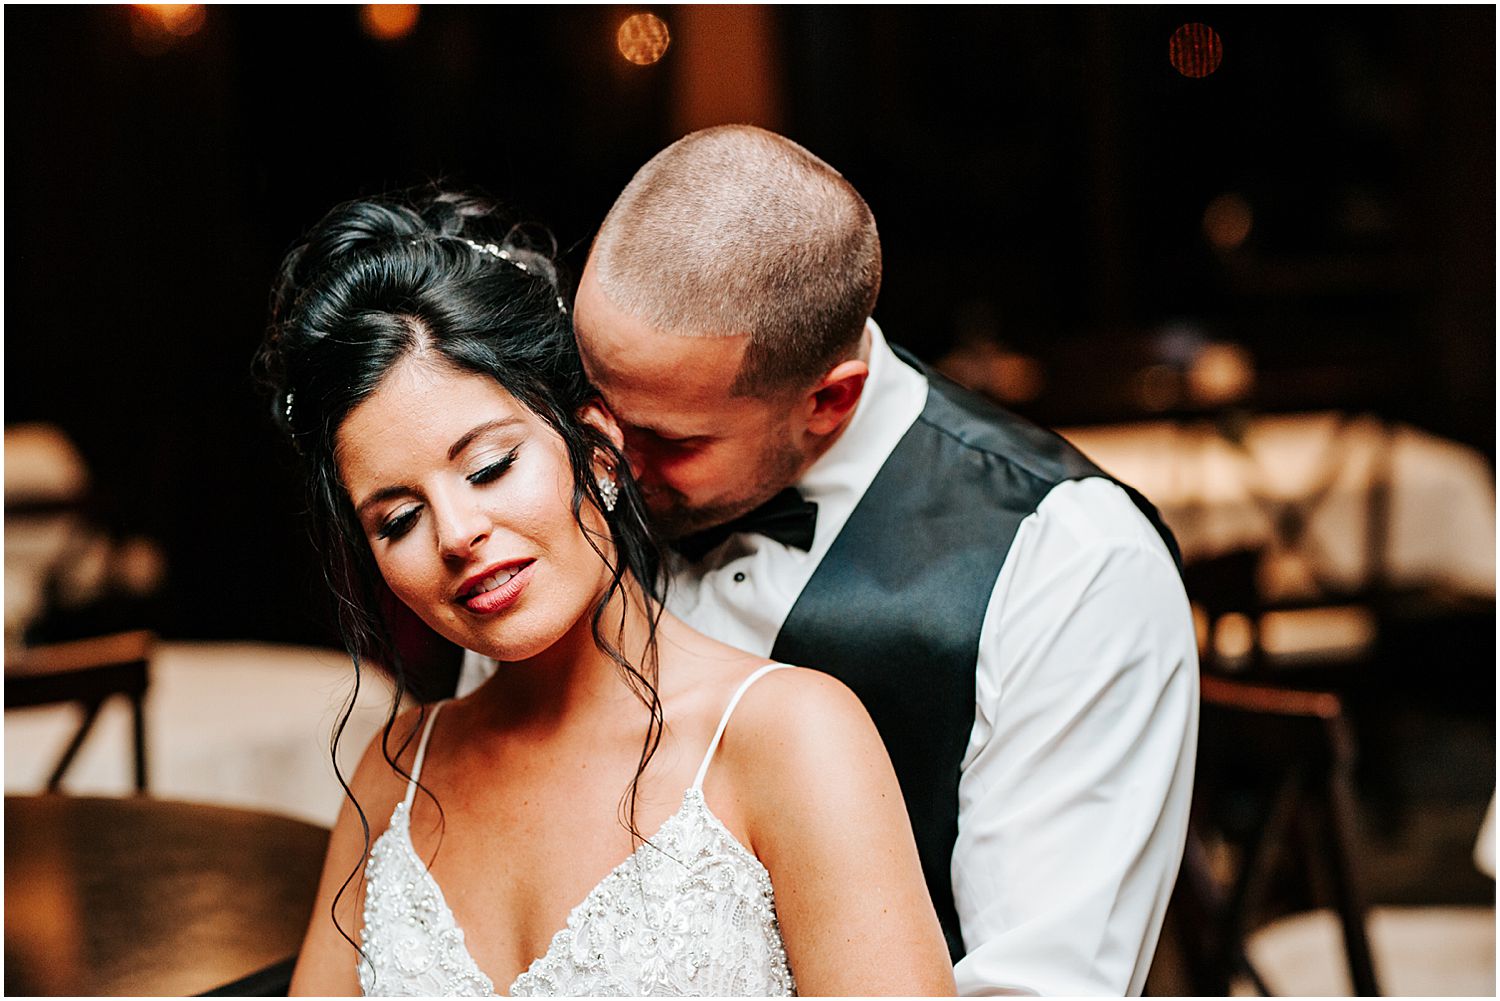 Intimate moments captured at this Clarks Landing Yacht Club wedding